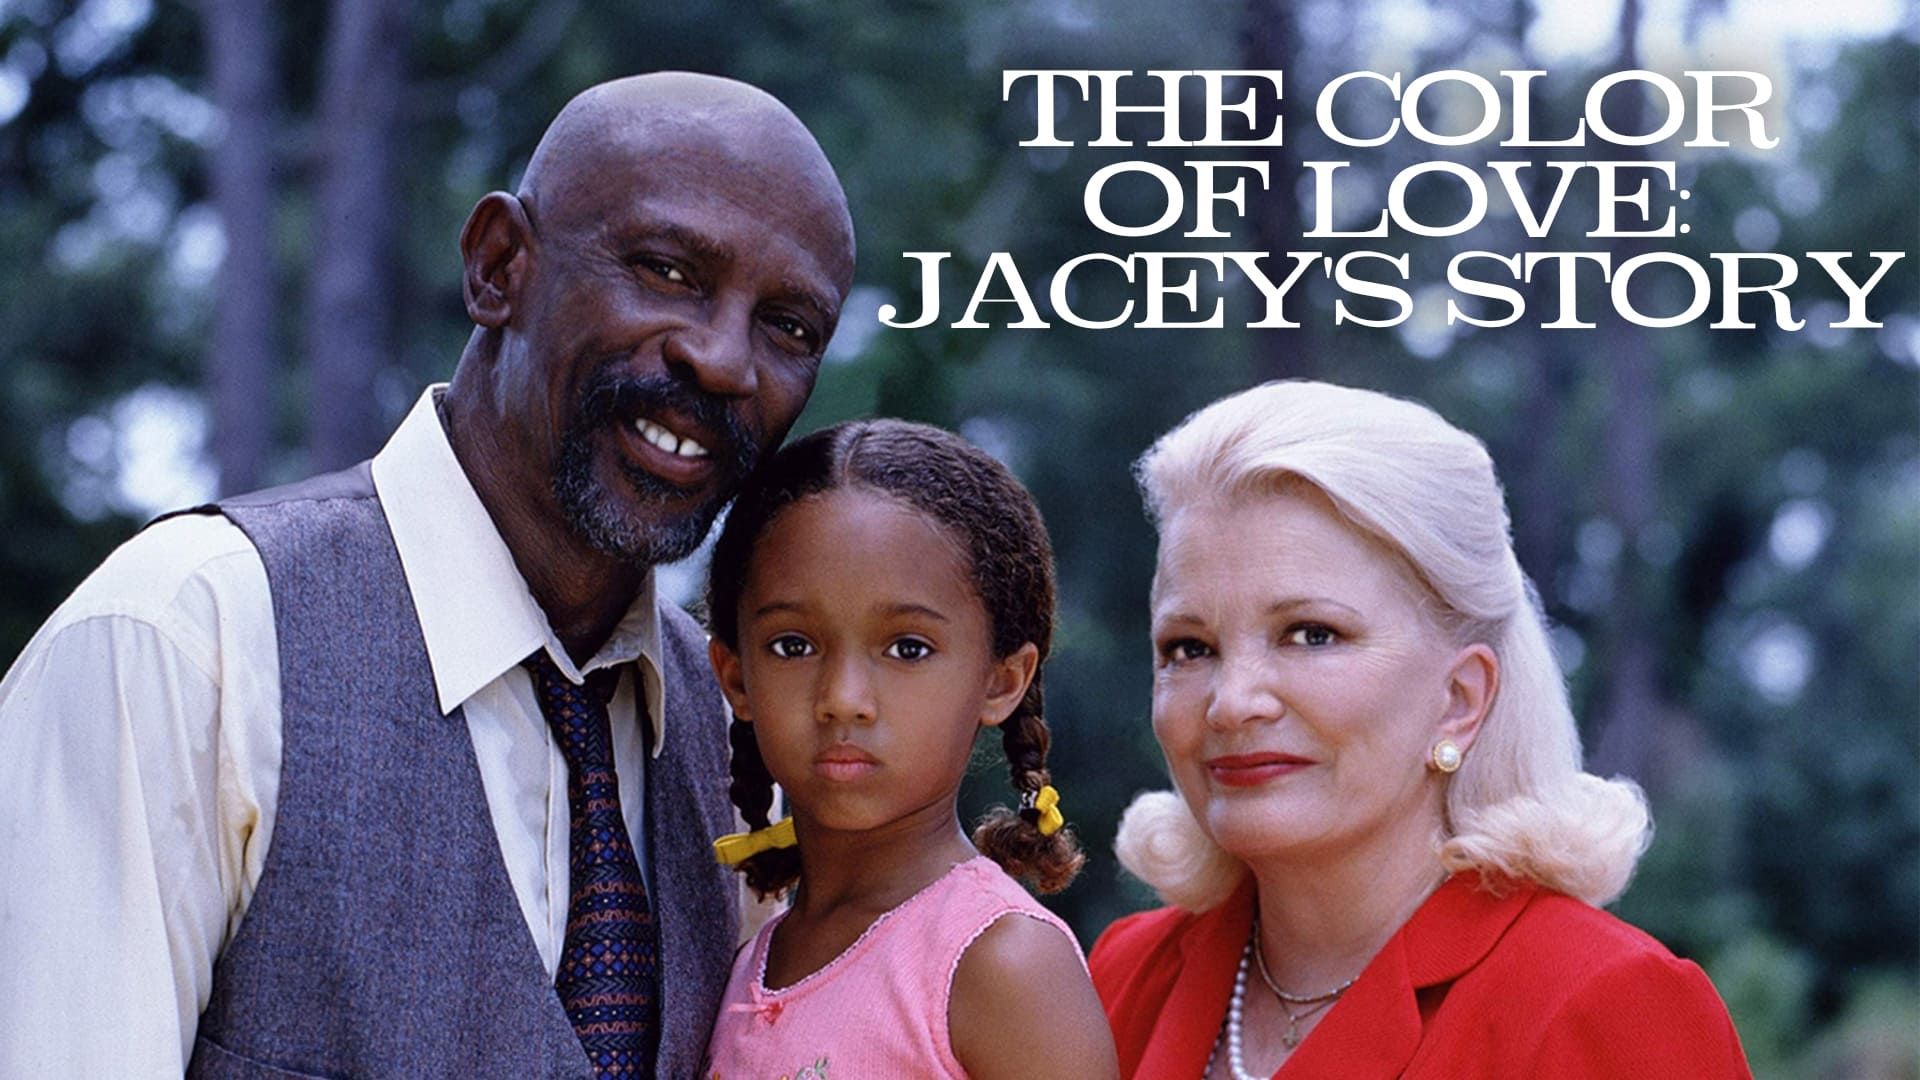 The Color of Love: Jacey's Story background